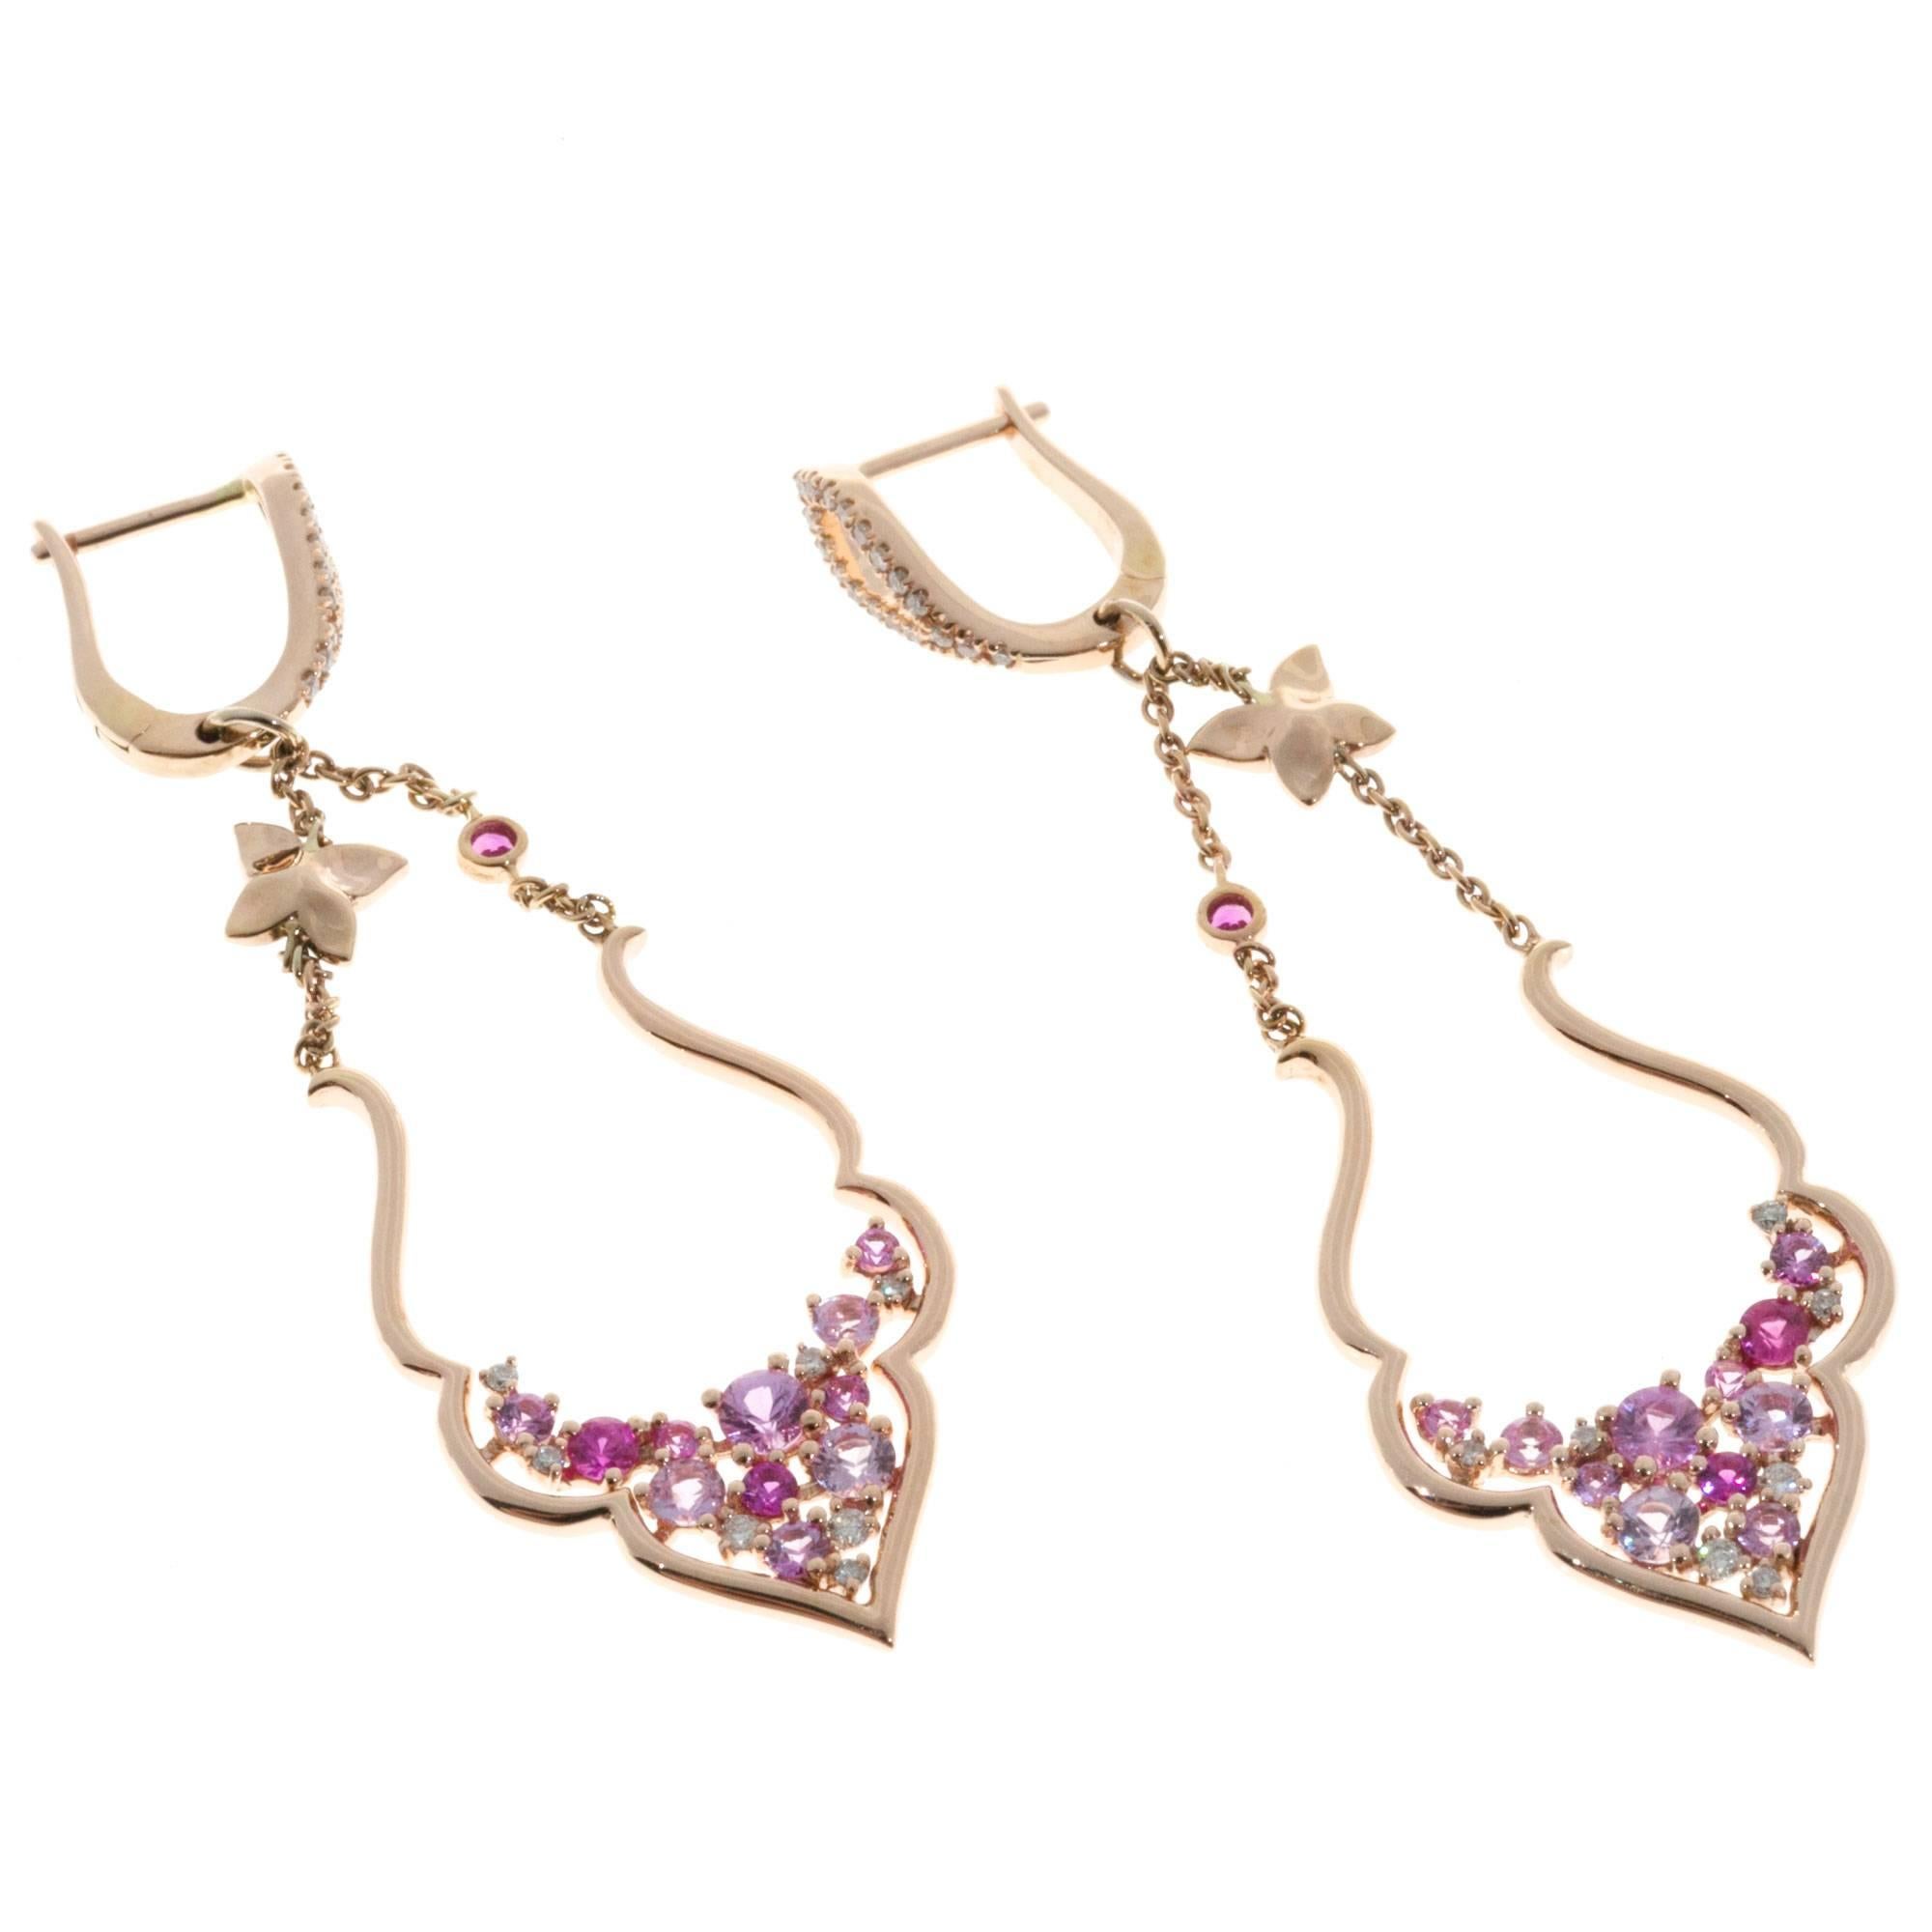 14k Rose gold dangle earrings with pink Sapphires and diamonds.

24 round pink Sapphires, approx. total weight 1.18cts
58 round diamonds, approx. total weight .21cts, H, VS
14k rose gold
Tested: 14k
Stamped: 14k 585
Hallmark: Diamond